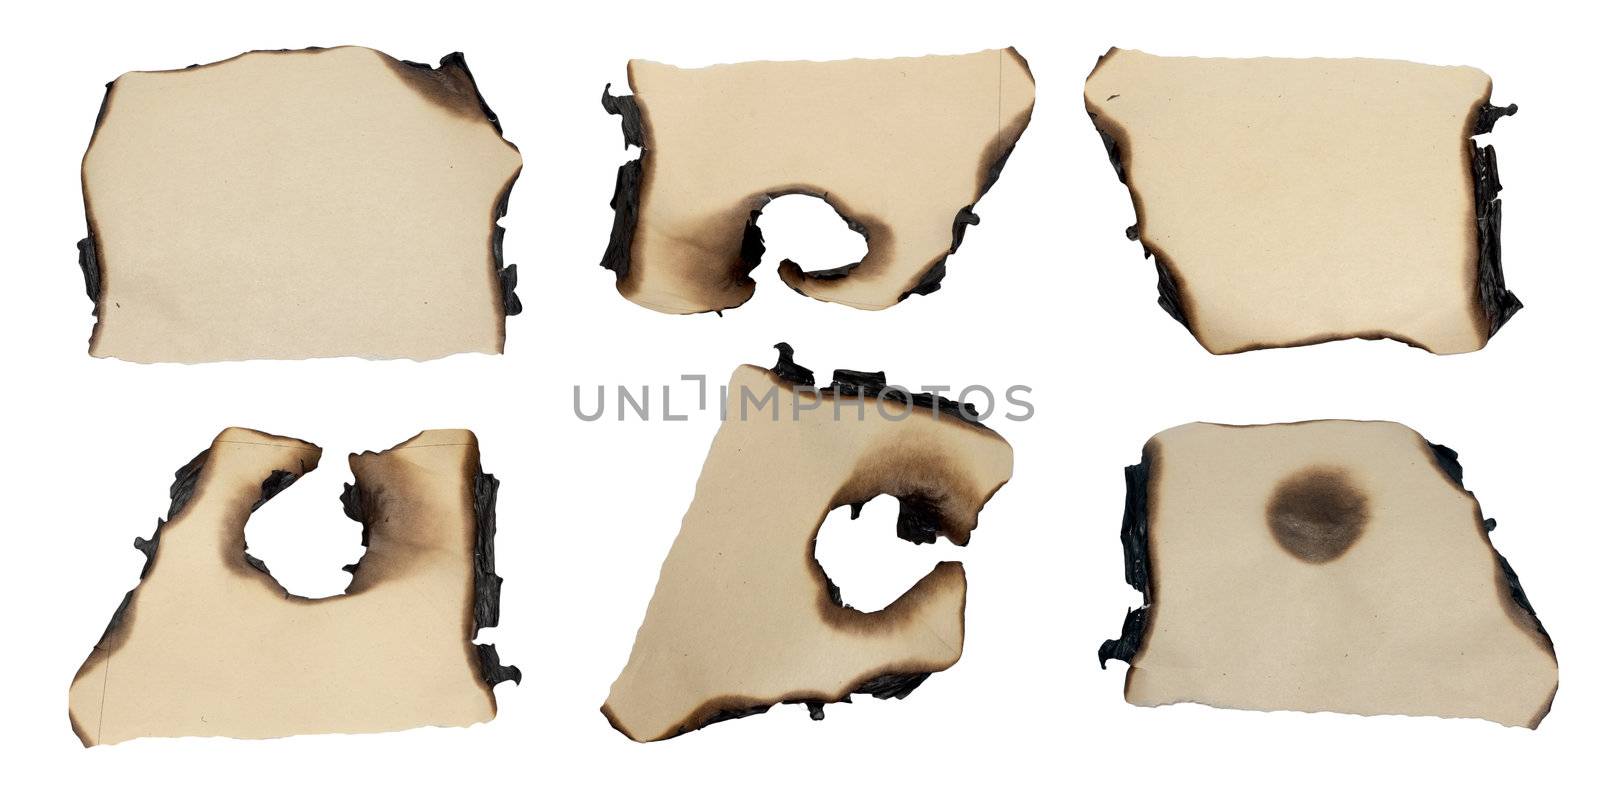 charred scraps of paper on a white background by schankz